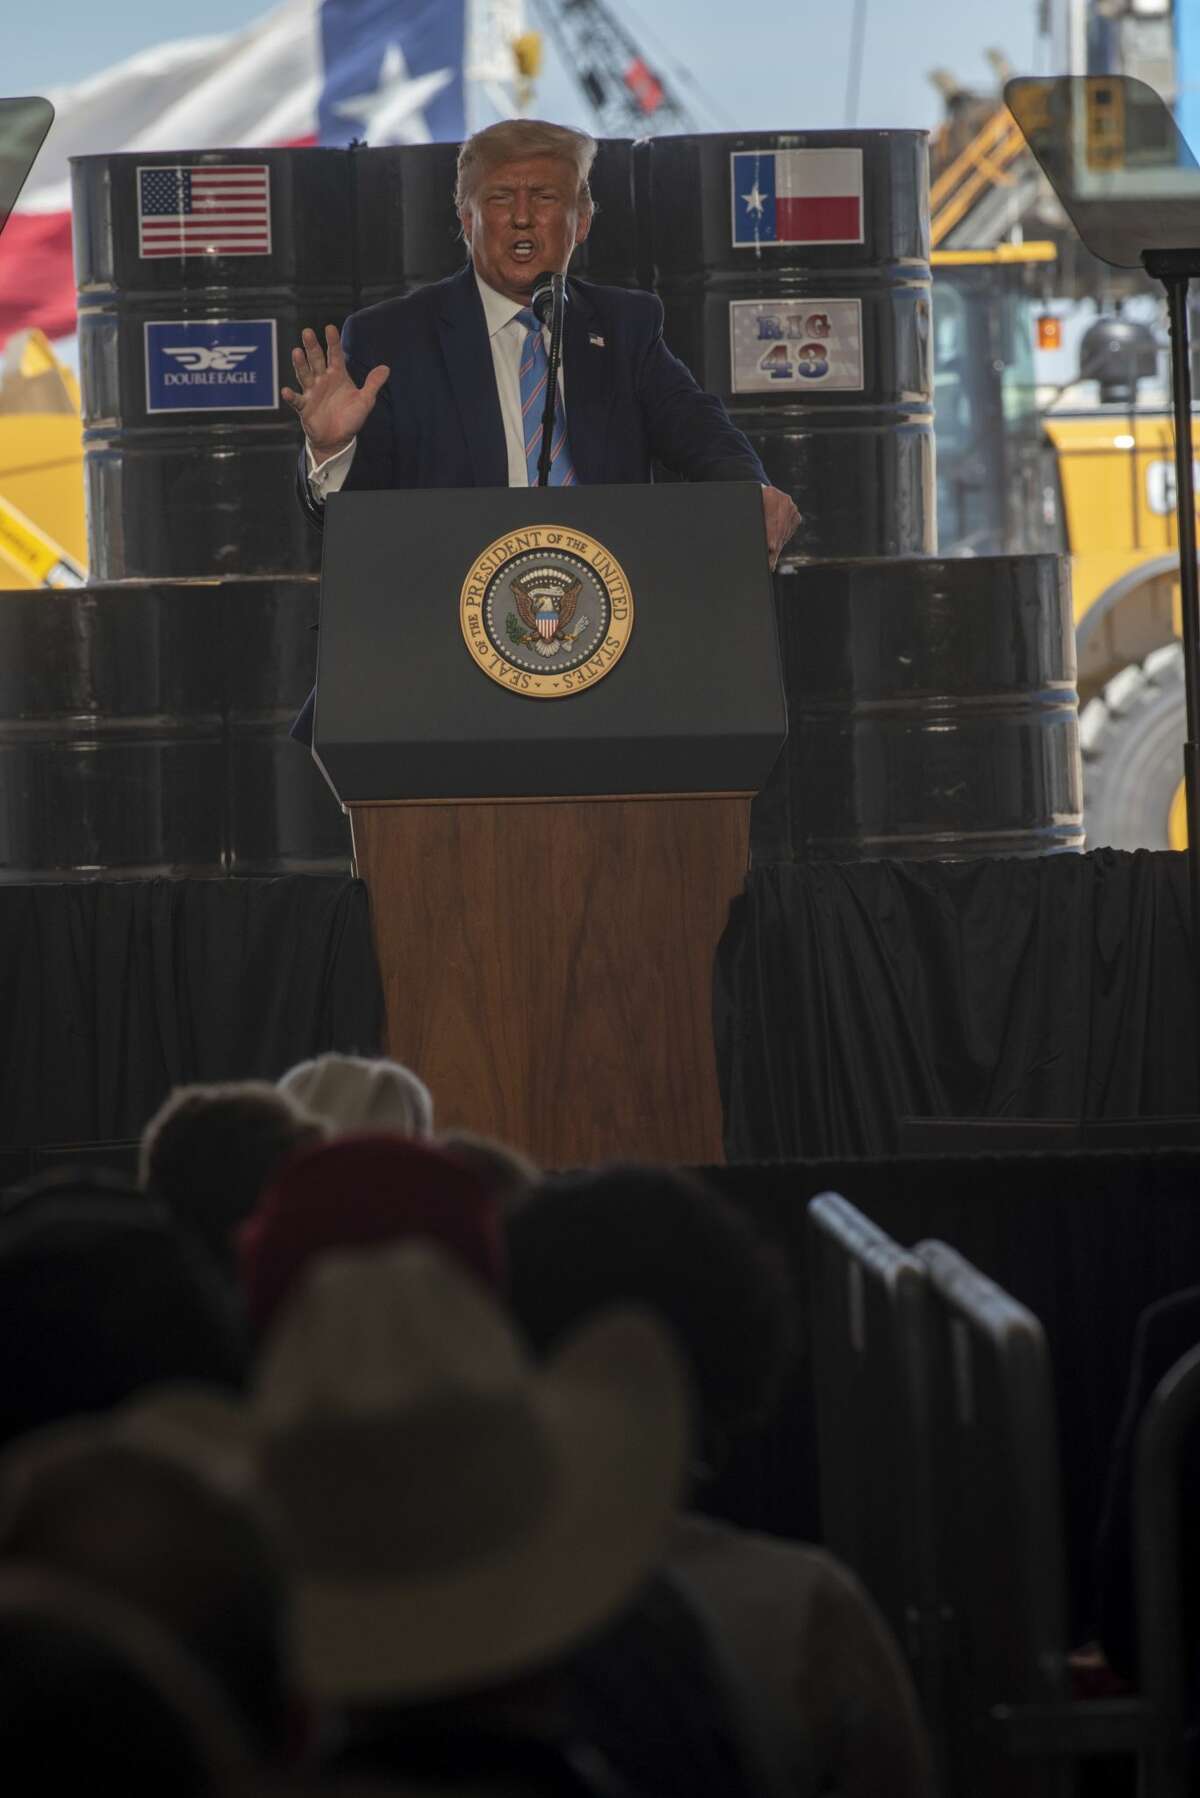 President Donald Trump talks to a crowd at a Double Eagle Energy oil and gas operation in front of Latshaw Rig No. 43 on Wednesday, July 29, 2020 in Midland County. Jacy Lewis/Reporter-Telegram